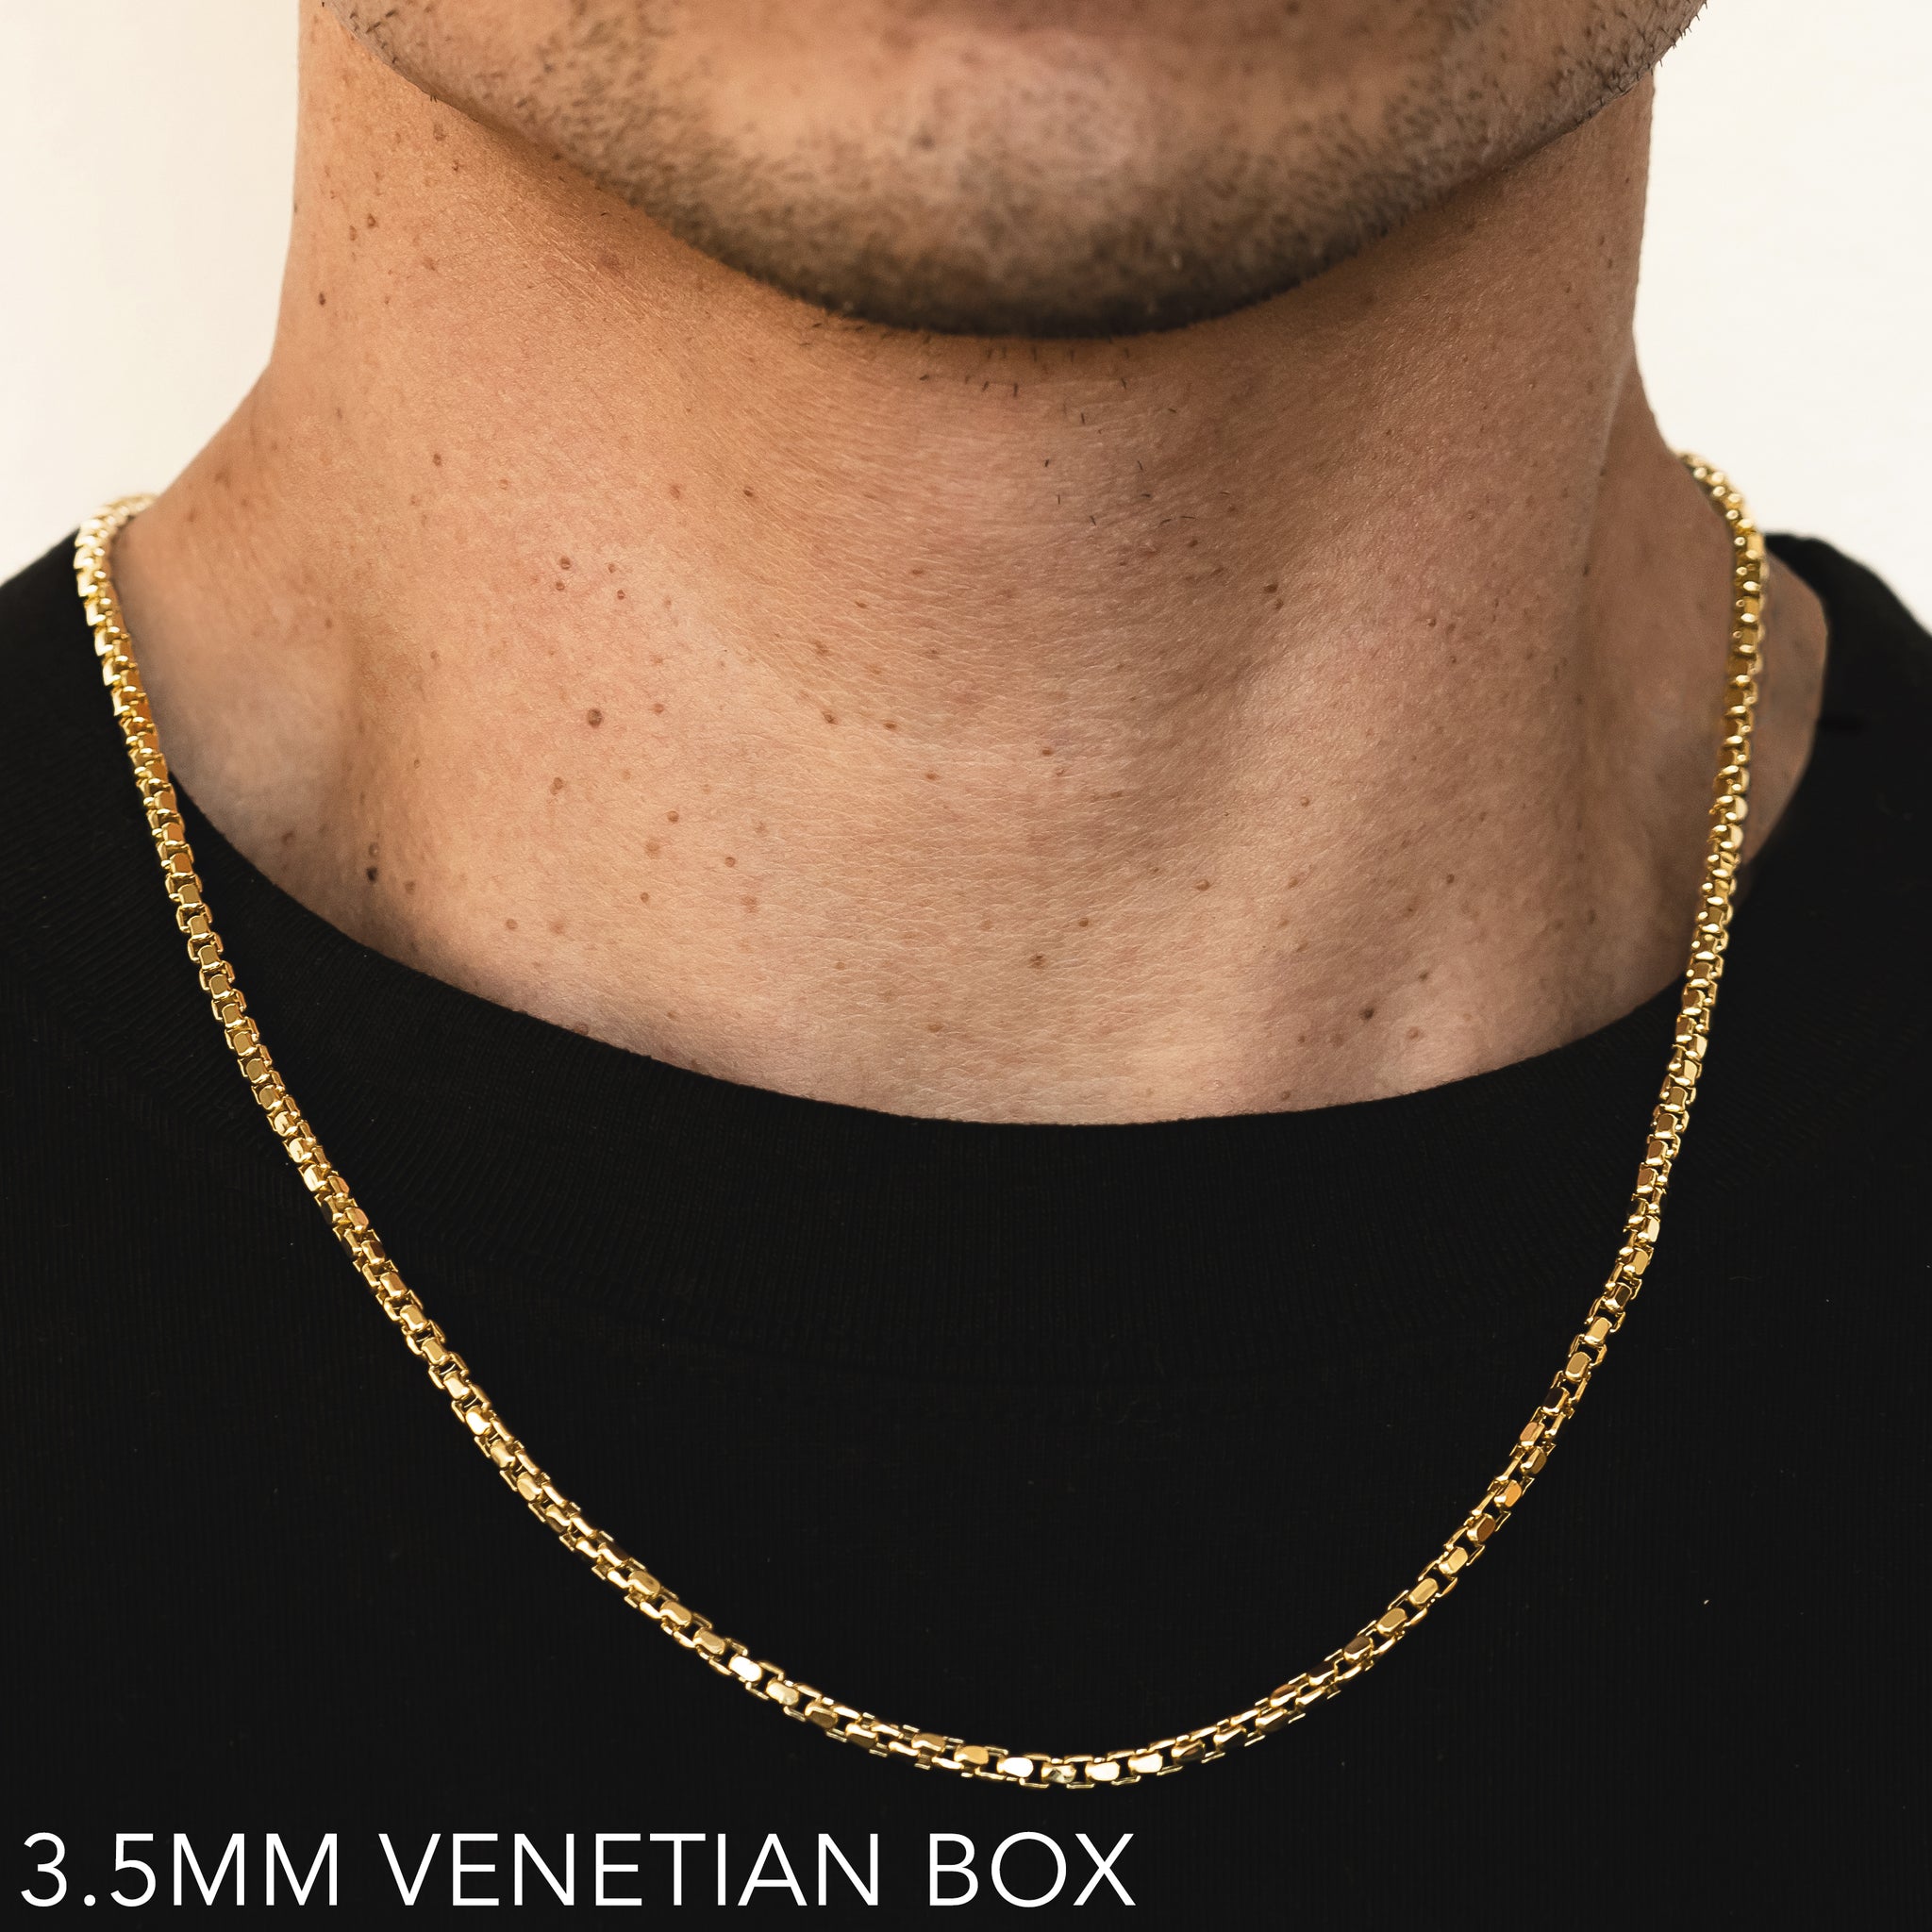 18K 3.5MM YELLOW GOLD SOLID VENETIAN BOX 20" CHAIN NECKLACE (AVAILABLE IN LENGTHS 7" - 30")